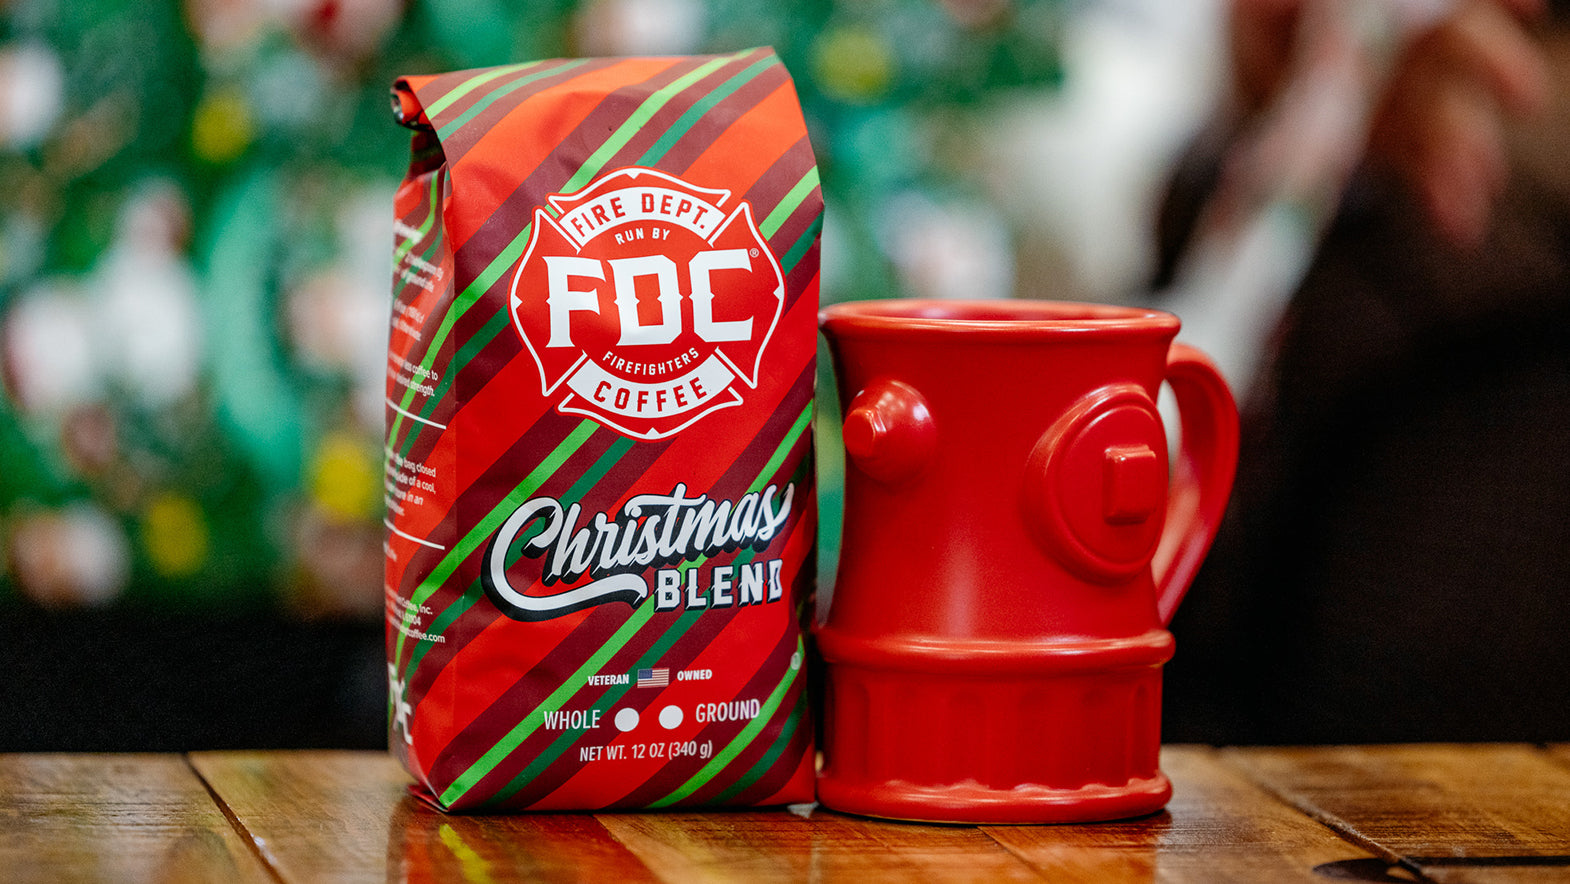 Celebrate the season of giving with these top gifts for coffee lovers.